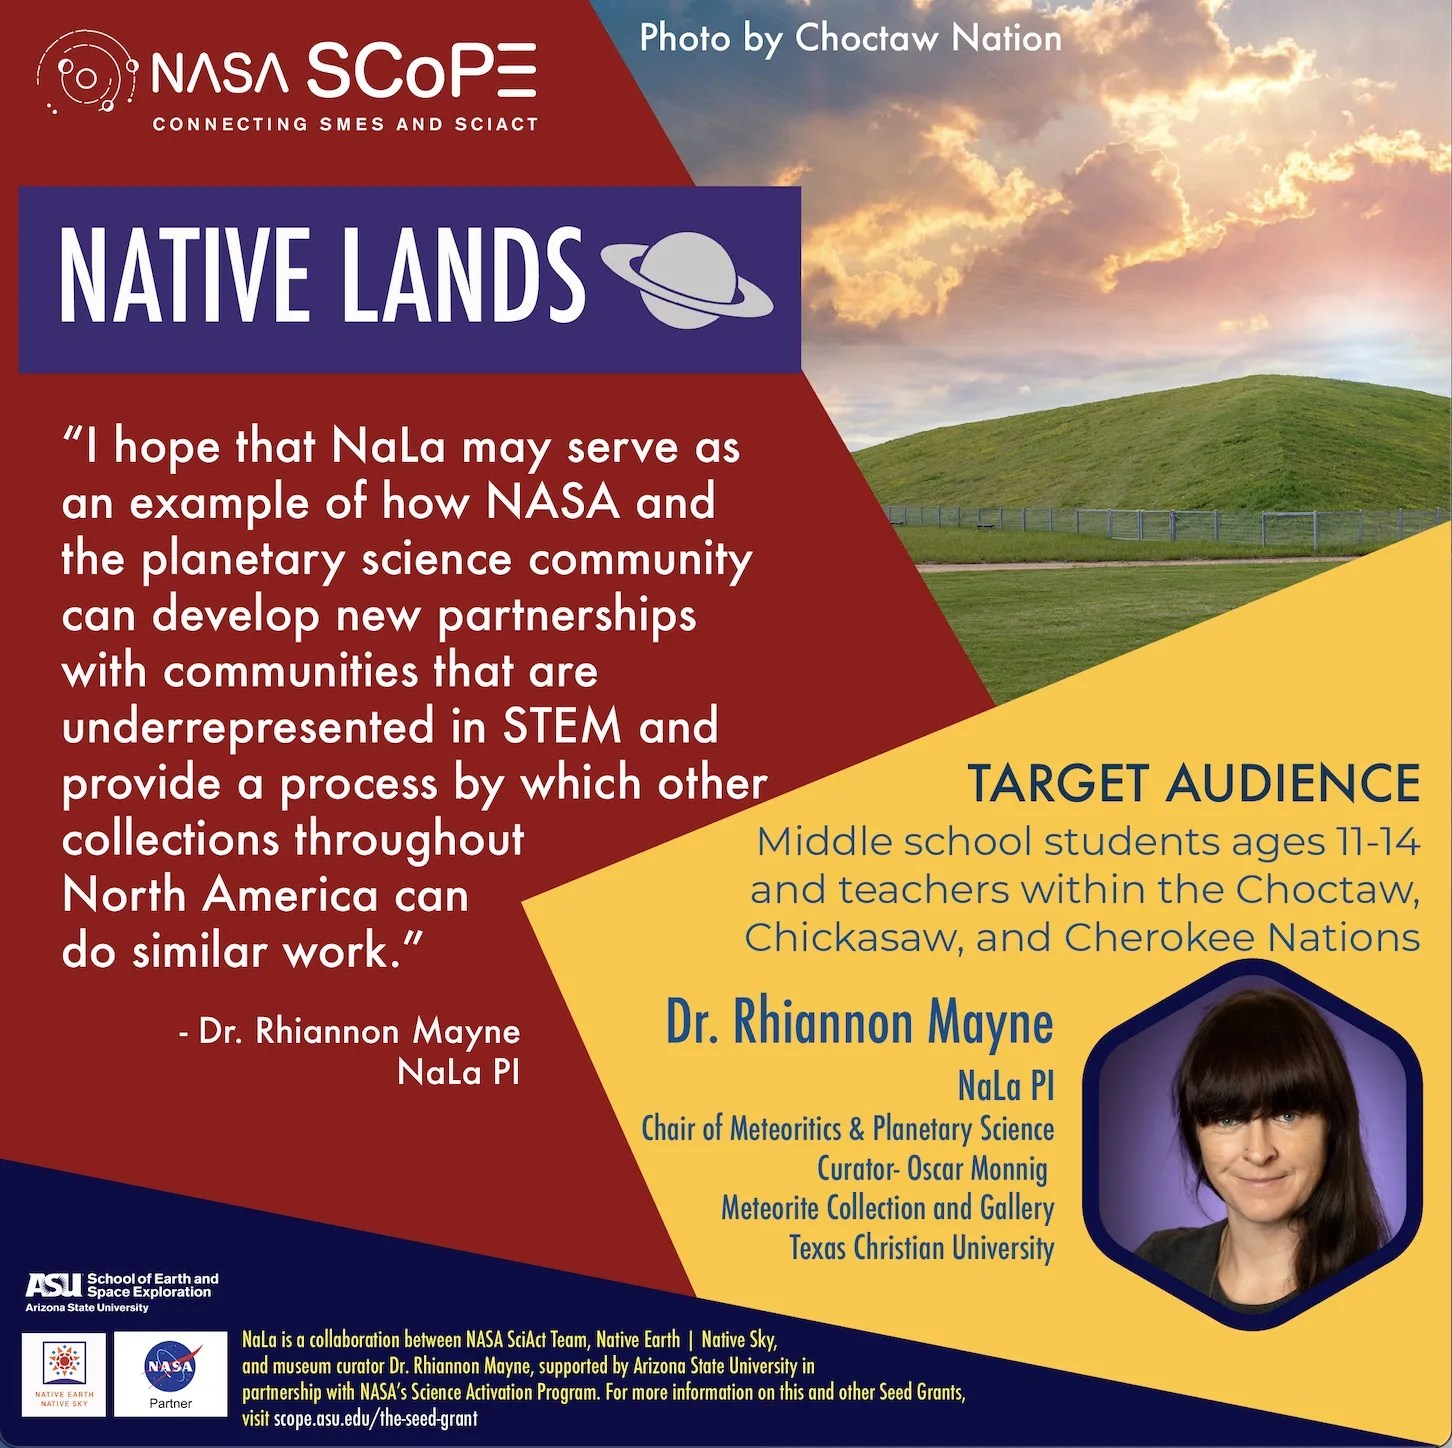 Nala project infographic with logos, bio photo of Dr. Mayne, background photo of hill from choctaw nation, target audience defined as middle school students and teachers within the choctaw, chickasaw, and cherokee nations, and quote from Dr. Mayne